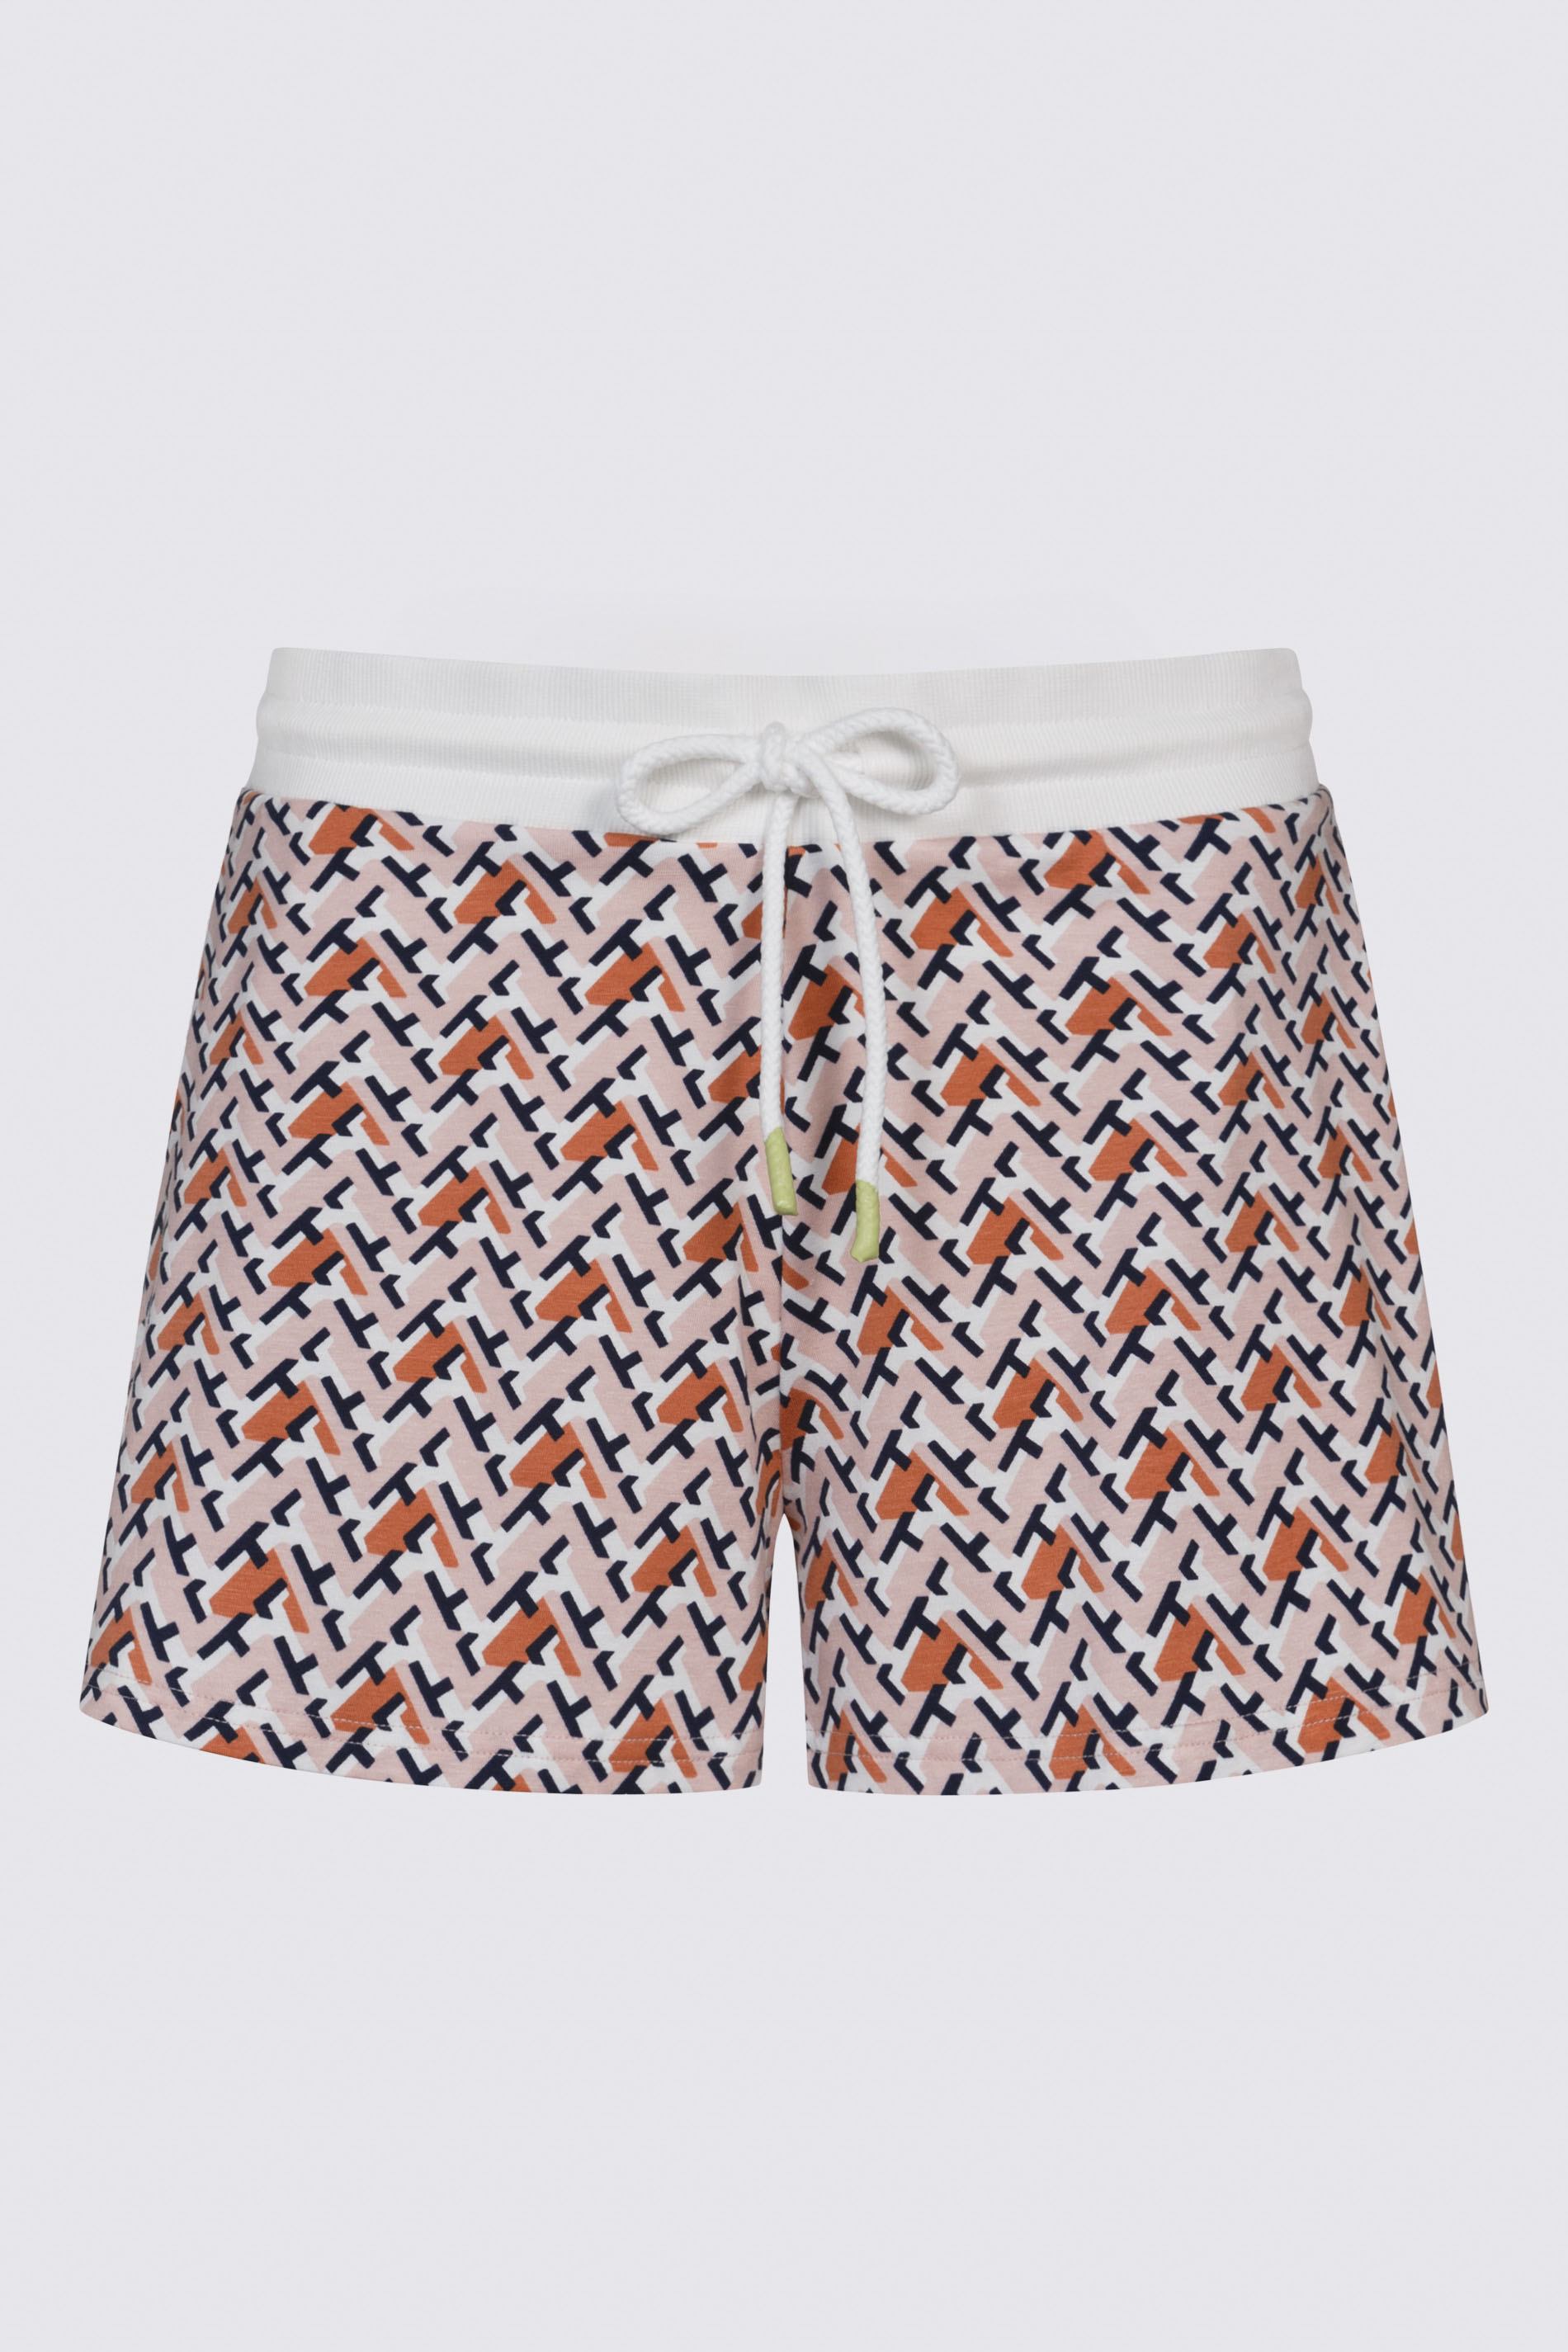 Shorts Serie Cassy Uitknippen | mey®